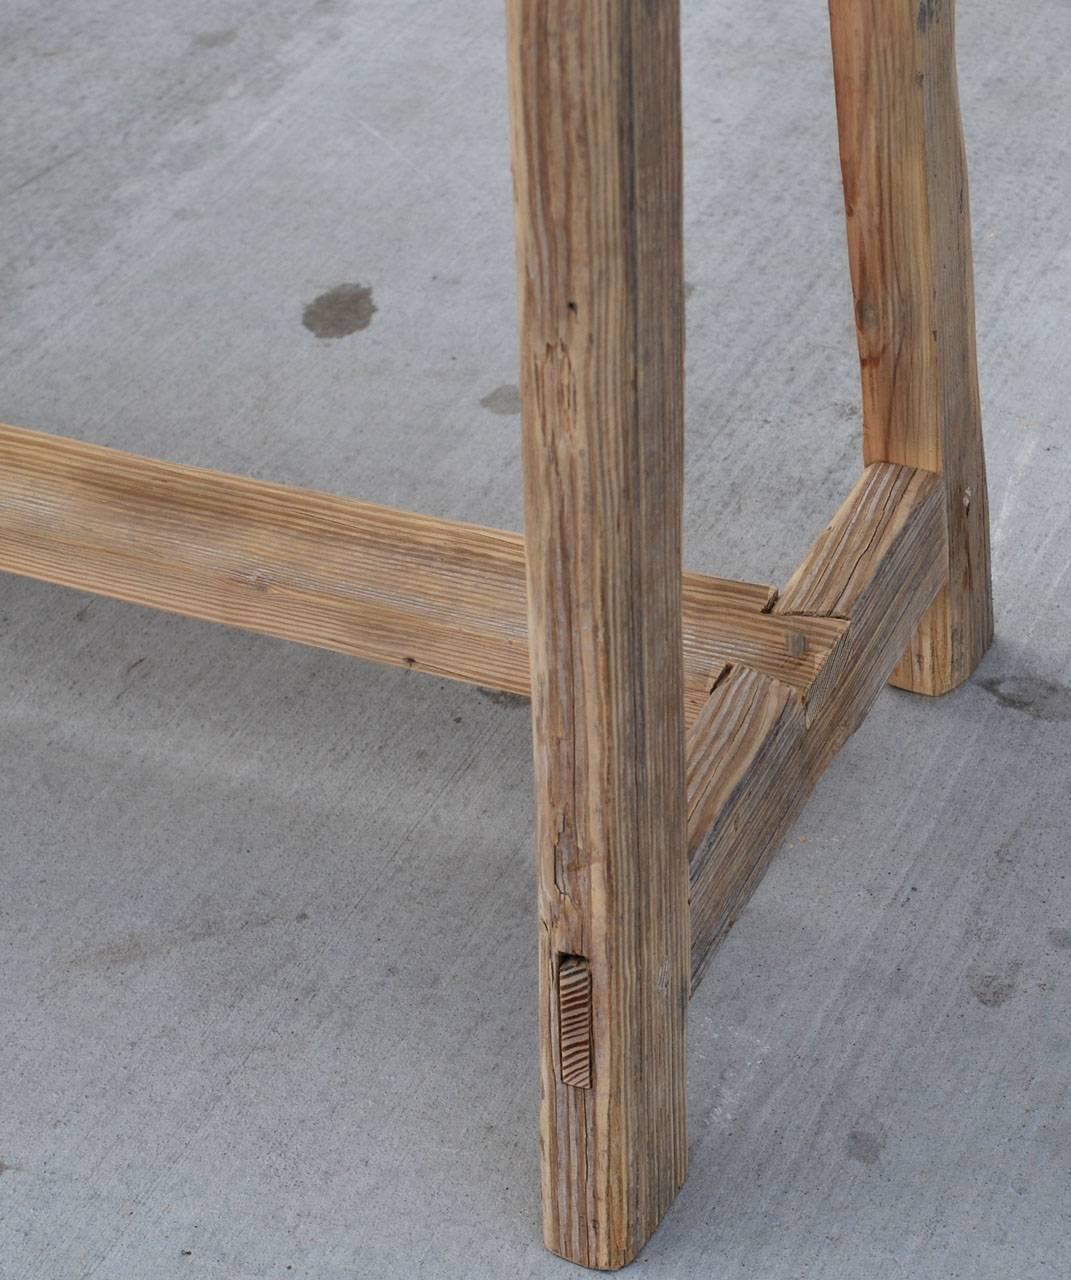 Primitive Agnes Console Table made from Reclaimed Wood by Petersen Antiques For Sale